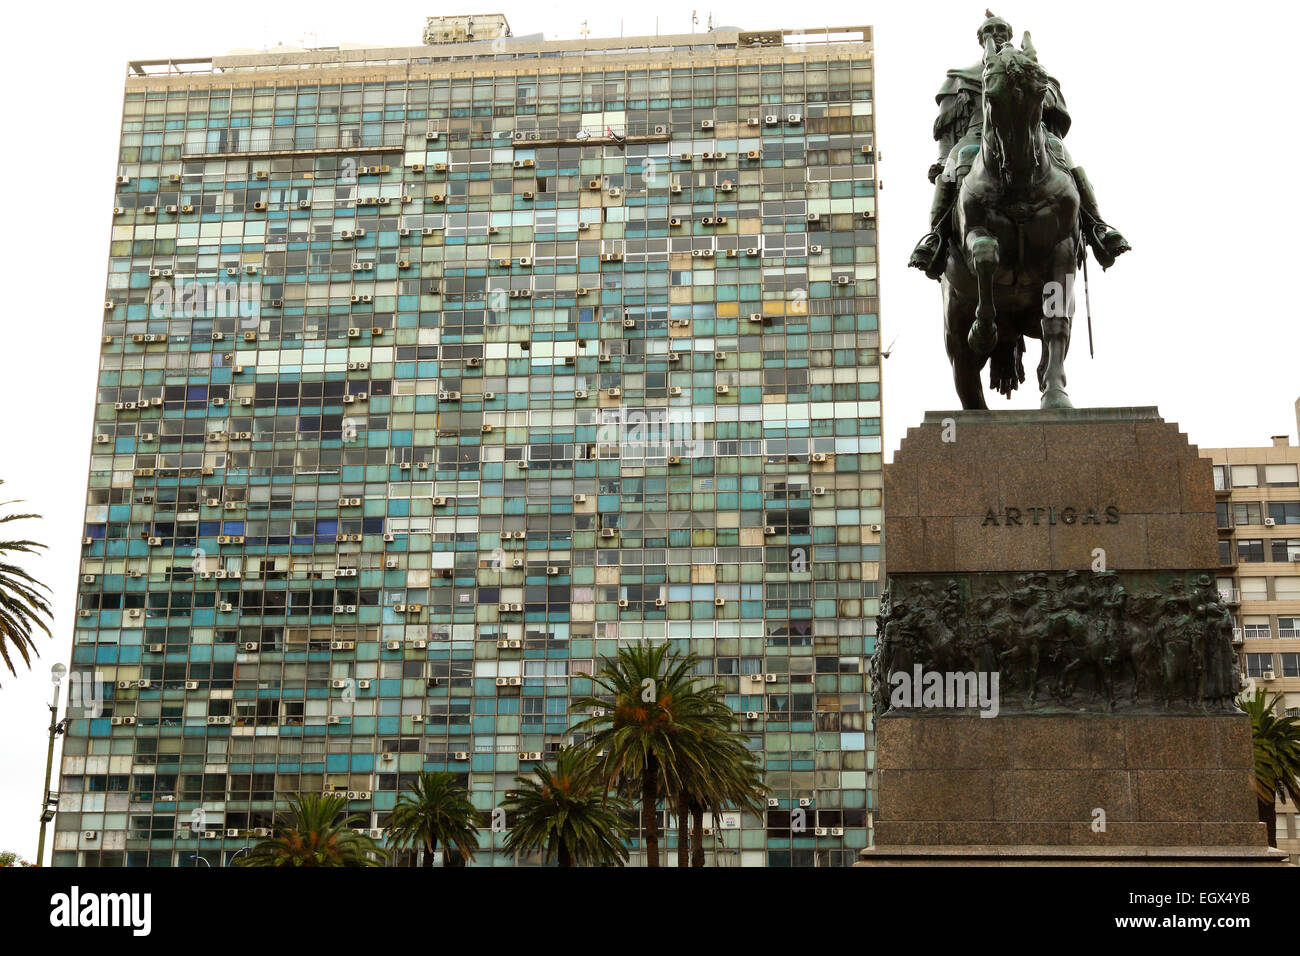 Montevideo Uruguay. A view of a nearby apartment building and Artigas statue from Independence square plaza in the capital city. Stock Photo